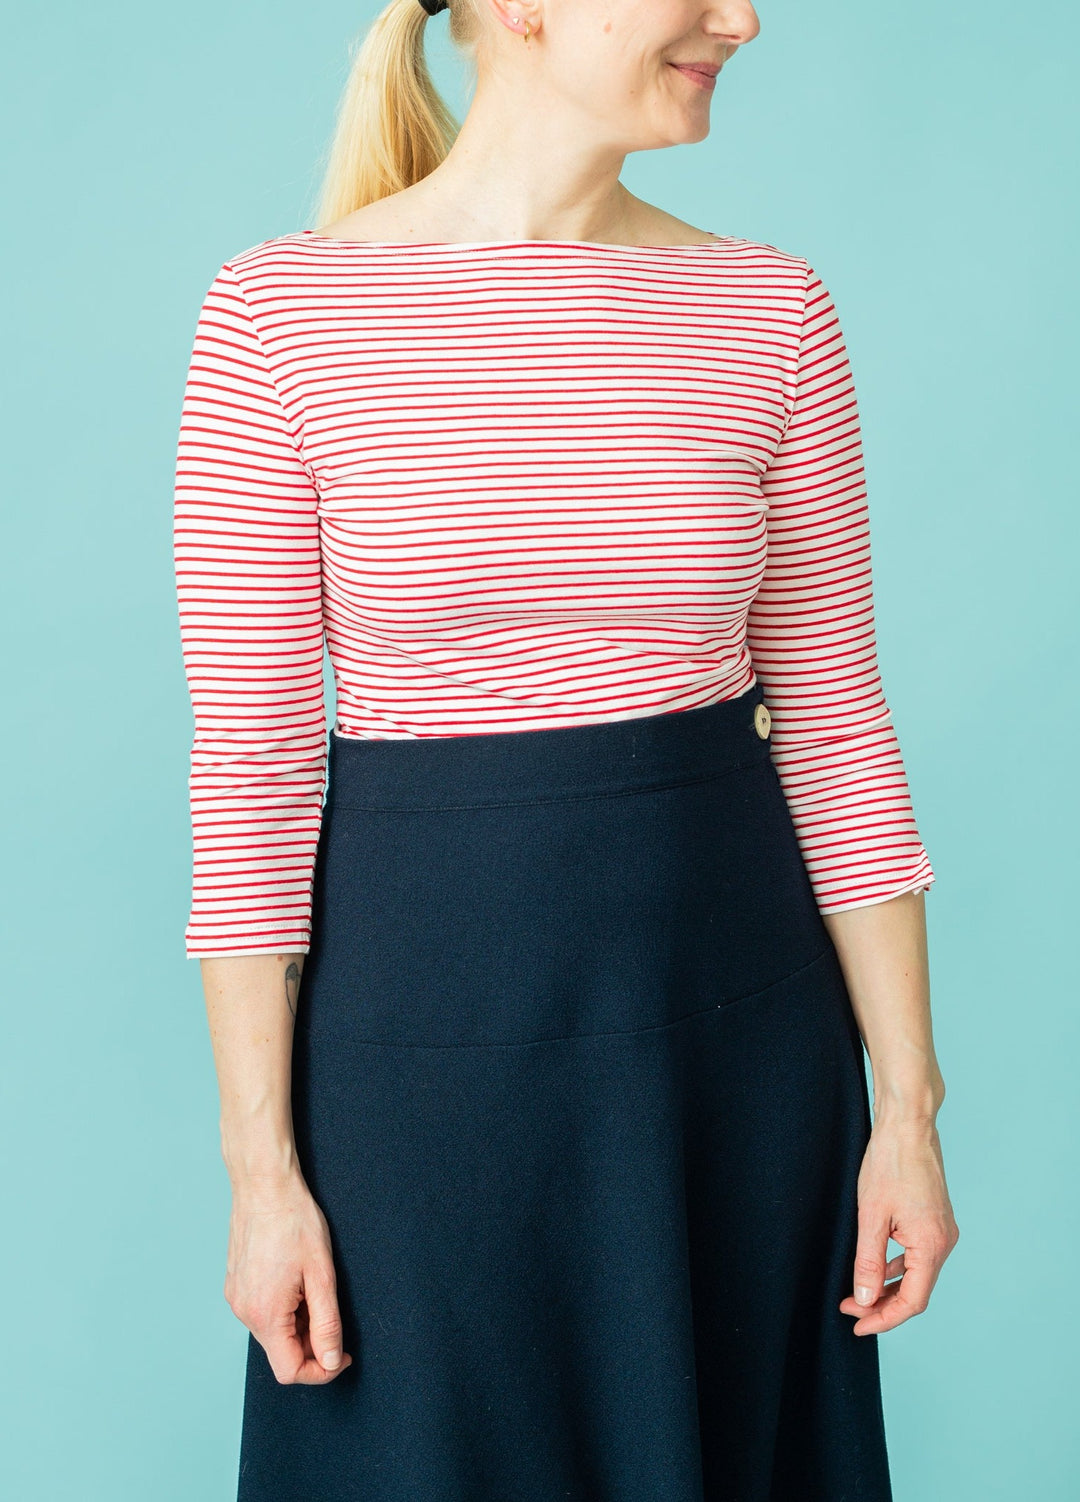 Boatneck Top Tricot Stripe - Red/White